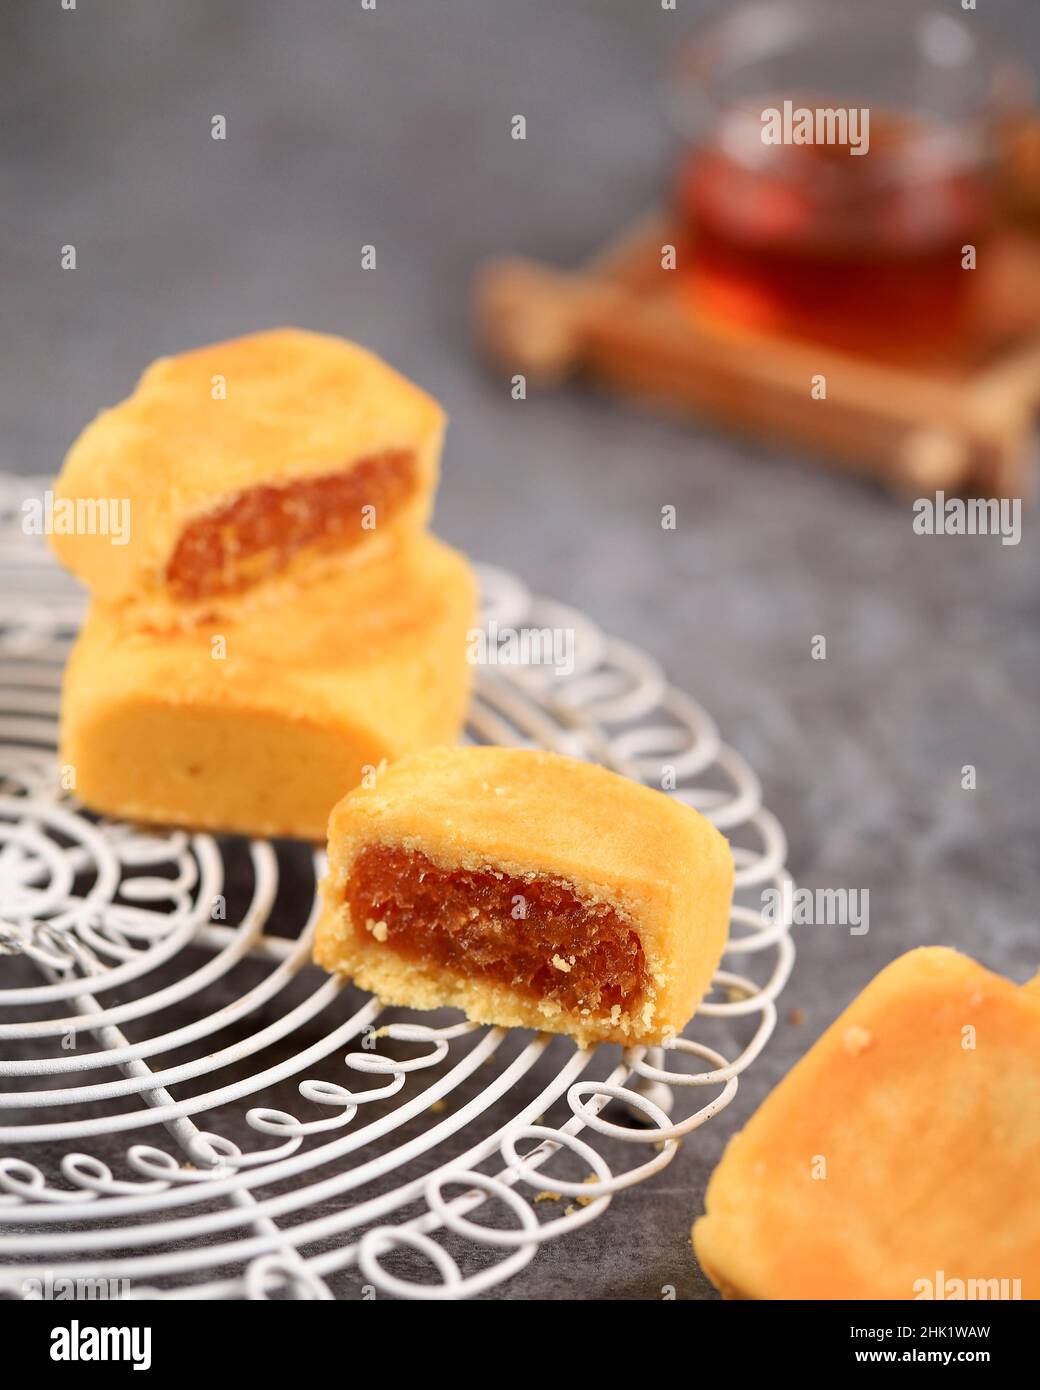 Pineapple Cake is a Sweet Traditional Taiwanese Pastry Containing Butter, Flour, Egg, Sugar, and Pineapple Jam. Served with Tea. Selected Focus Stock Photo